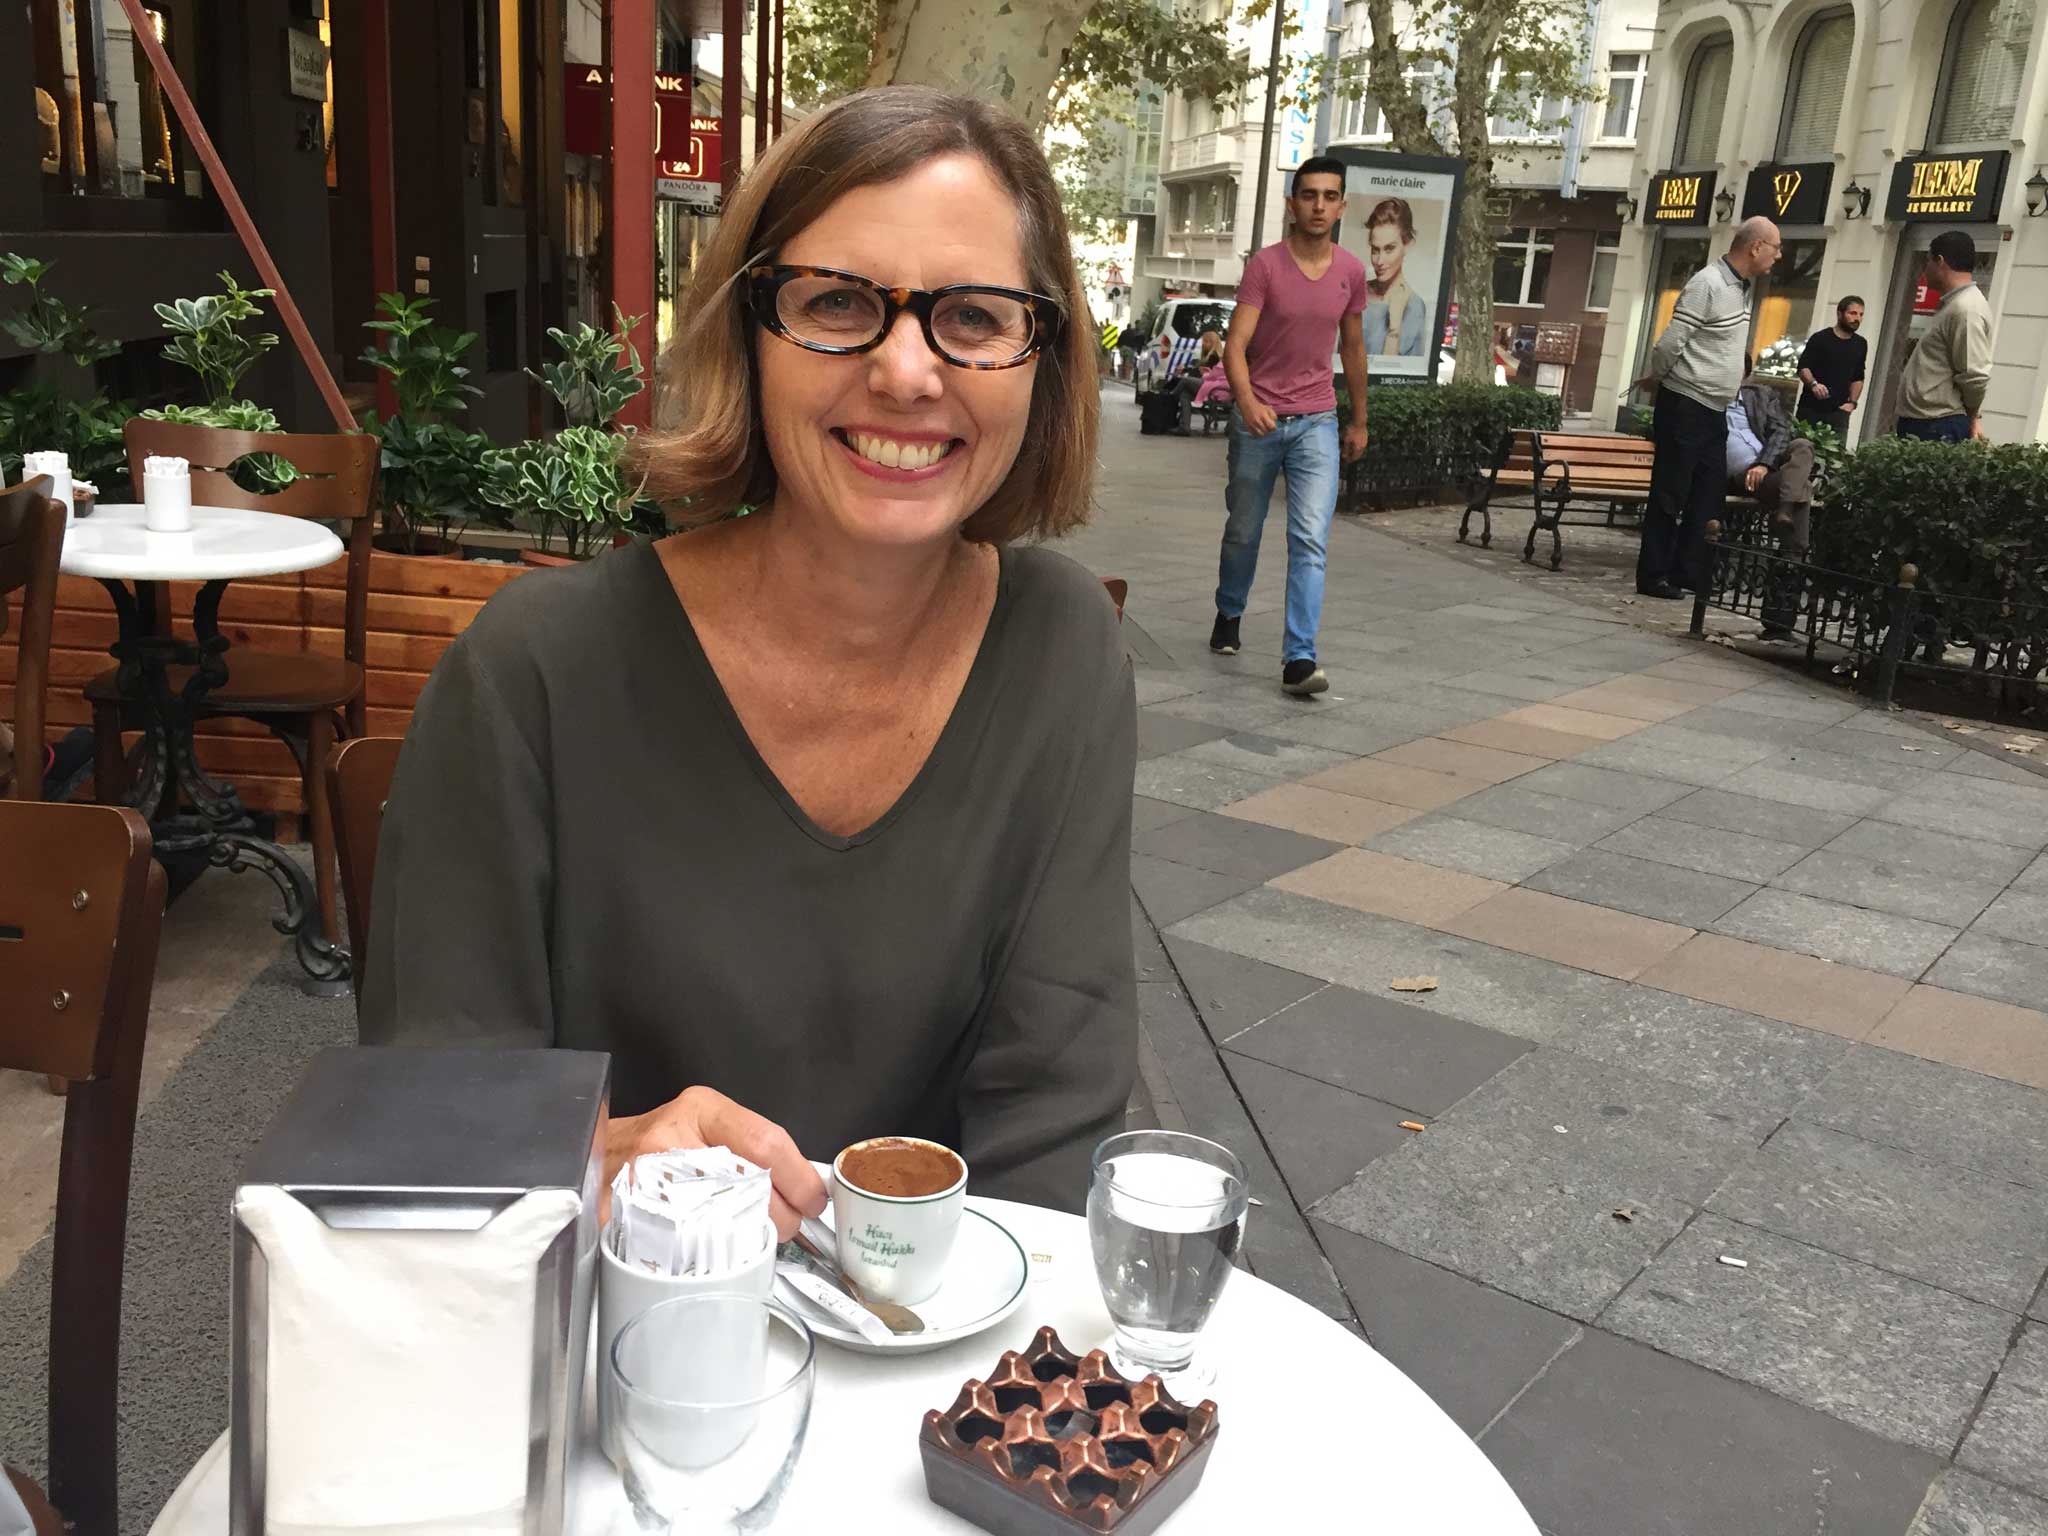 Carol Sebert, President of Creative Matters enjoys a cup of Turkish Coffee during the Inaugural Istanbul Carpet Week. Carol presented 'Contemporary Carpet Design' at the Istanbul International Carpet Conference, 6 October 2016. | Image courtesy of The Ruggist.